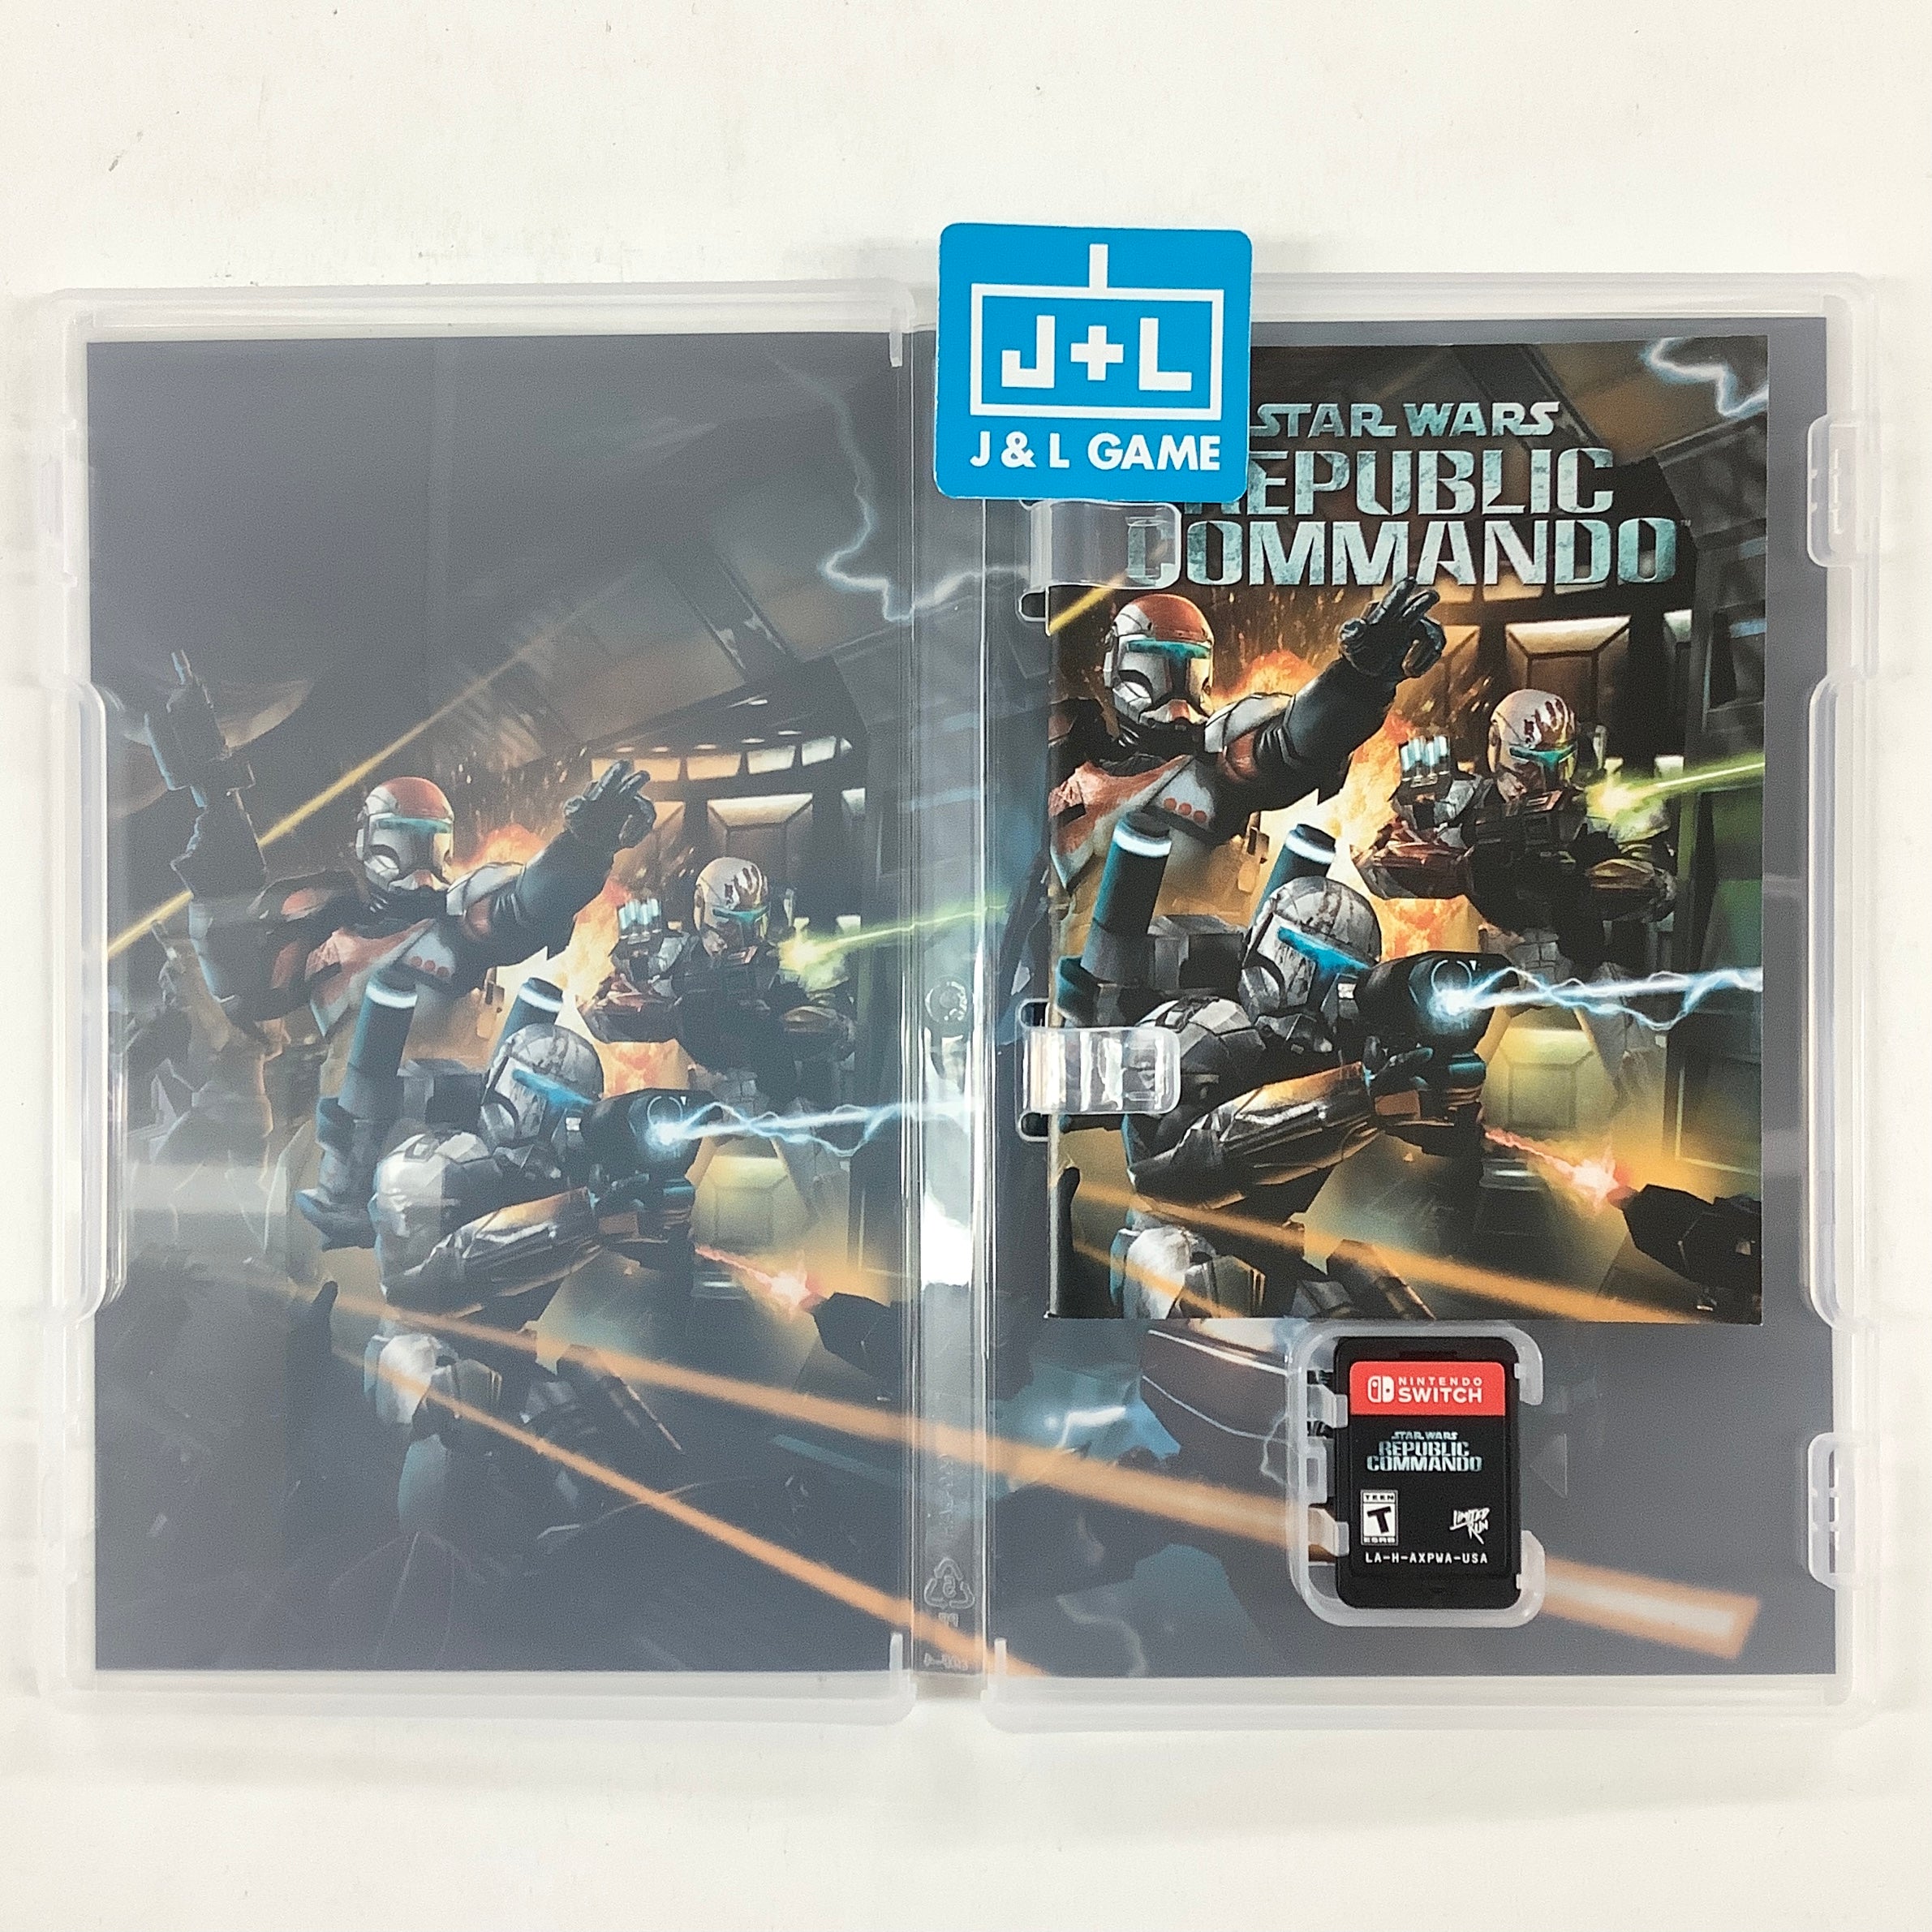 Star Wars Republic Commando (Limited Run #103) - (NSW) Nintendo Switch [UNBOXING] Video Games Limited Run Games   